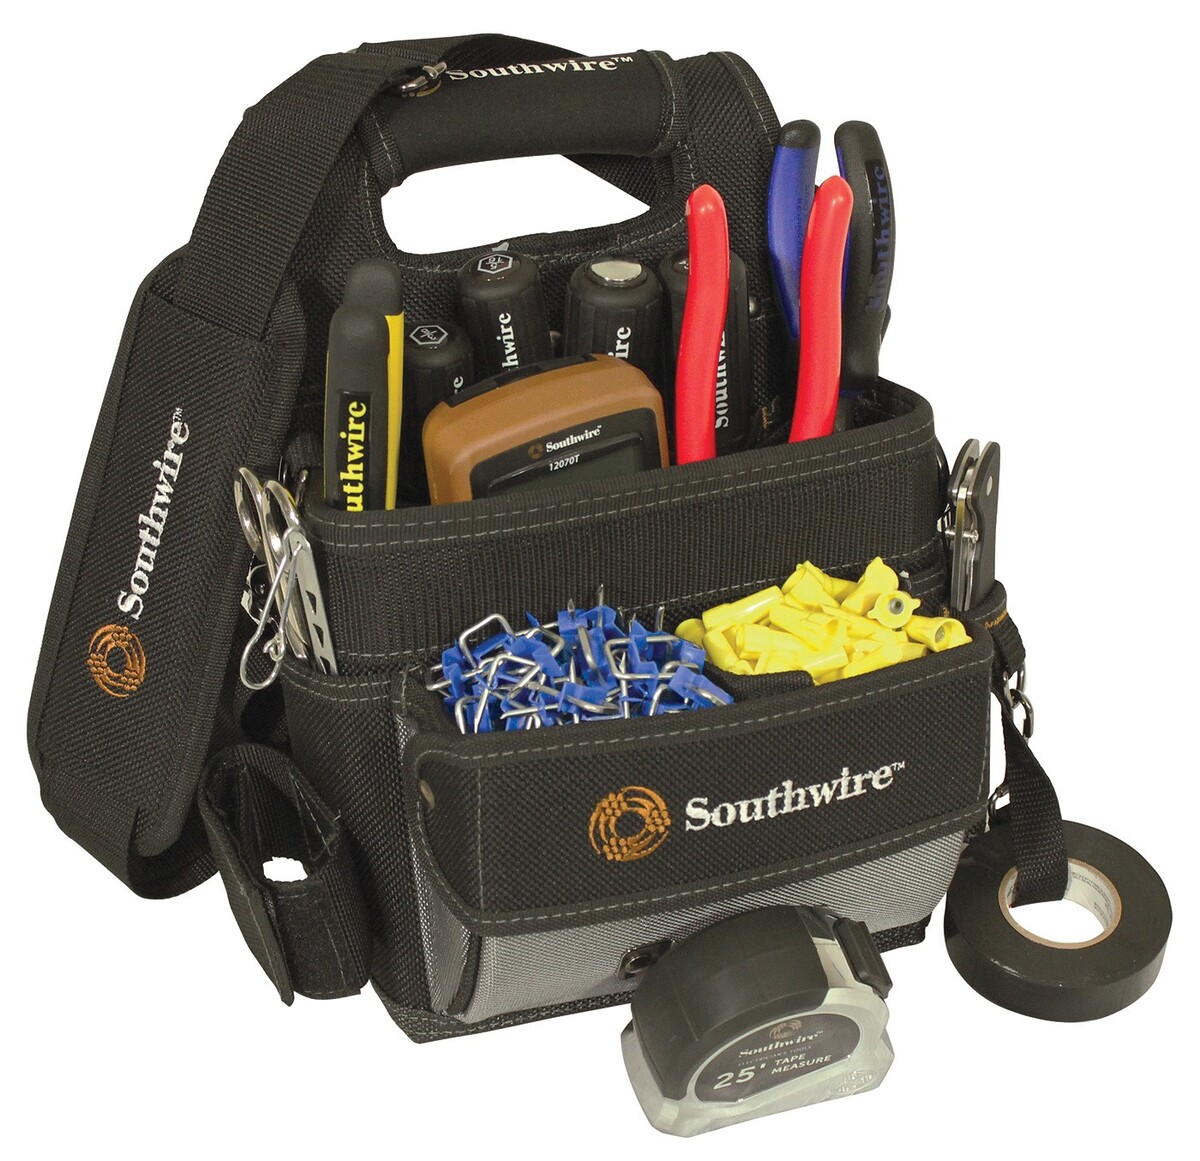 Southwire Tools Equipment Bagesp Electricians Shoulder Pouch Tool Carrier for sale online 